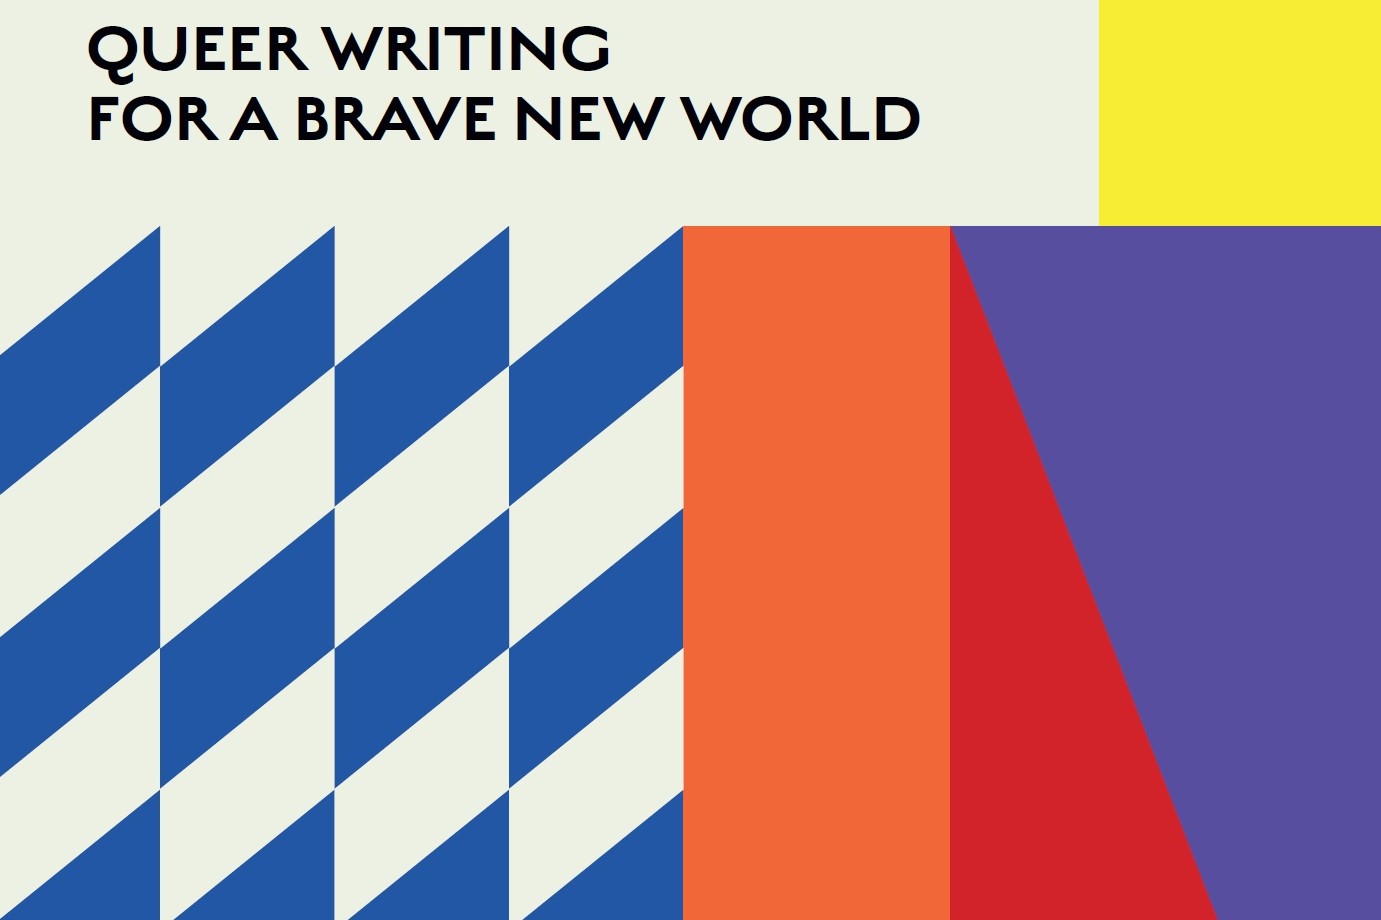 Queer writing for a brave new world